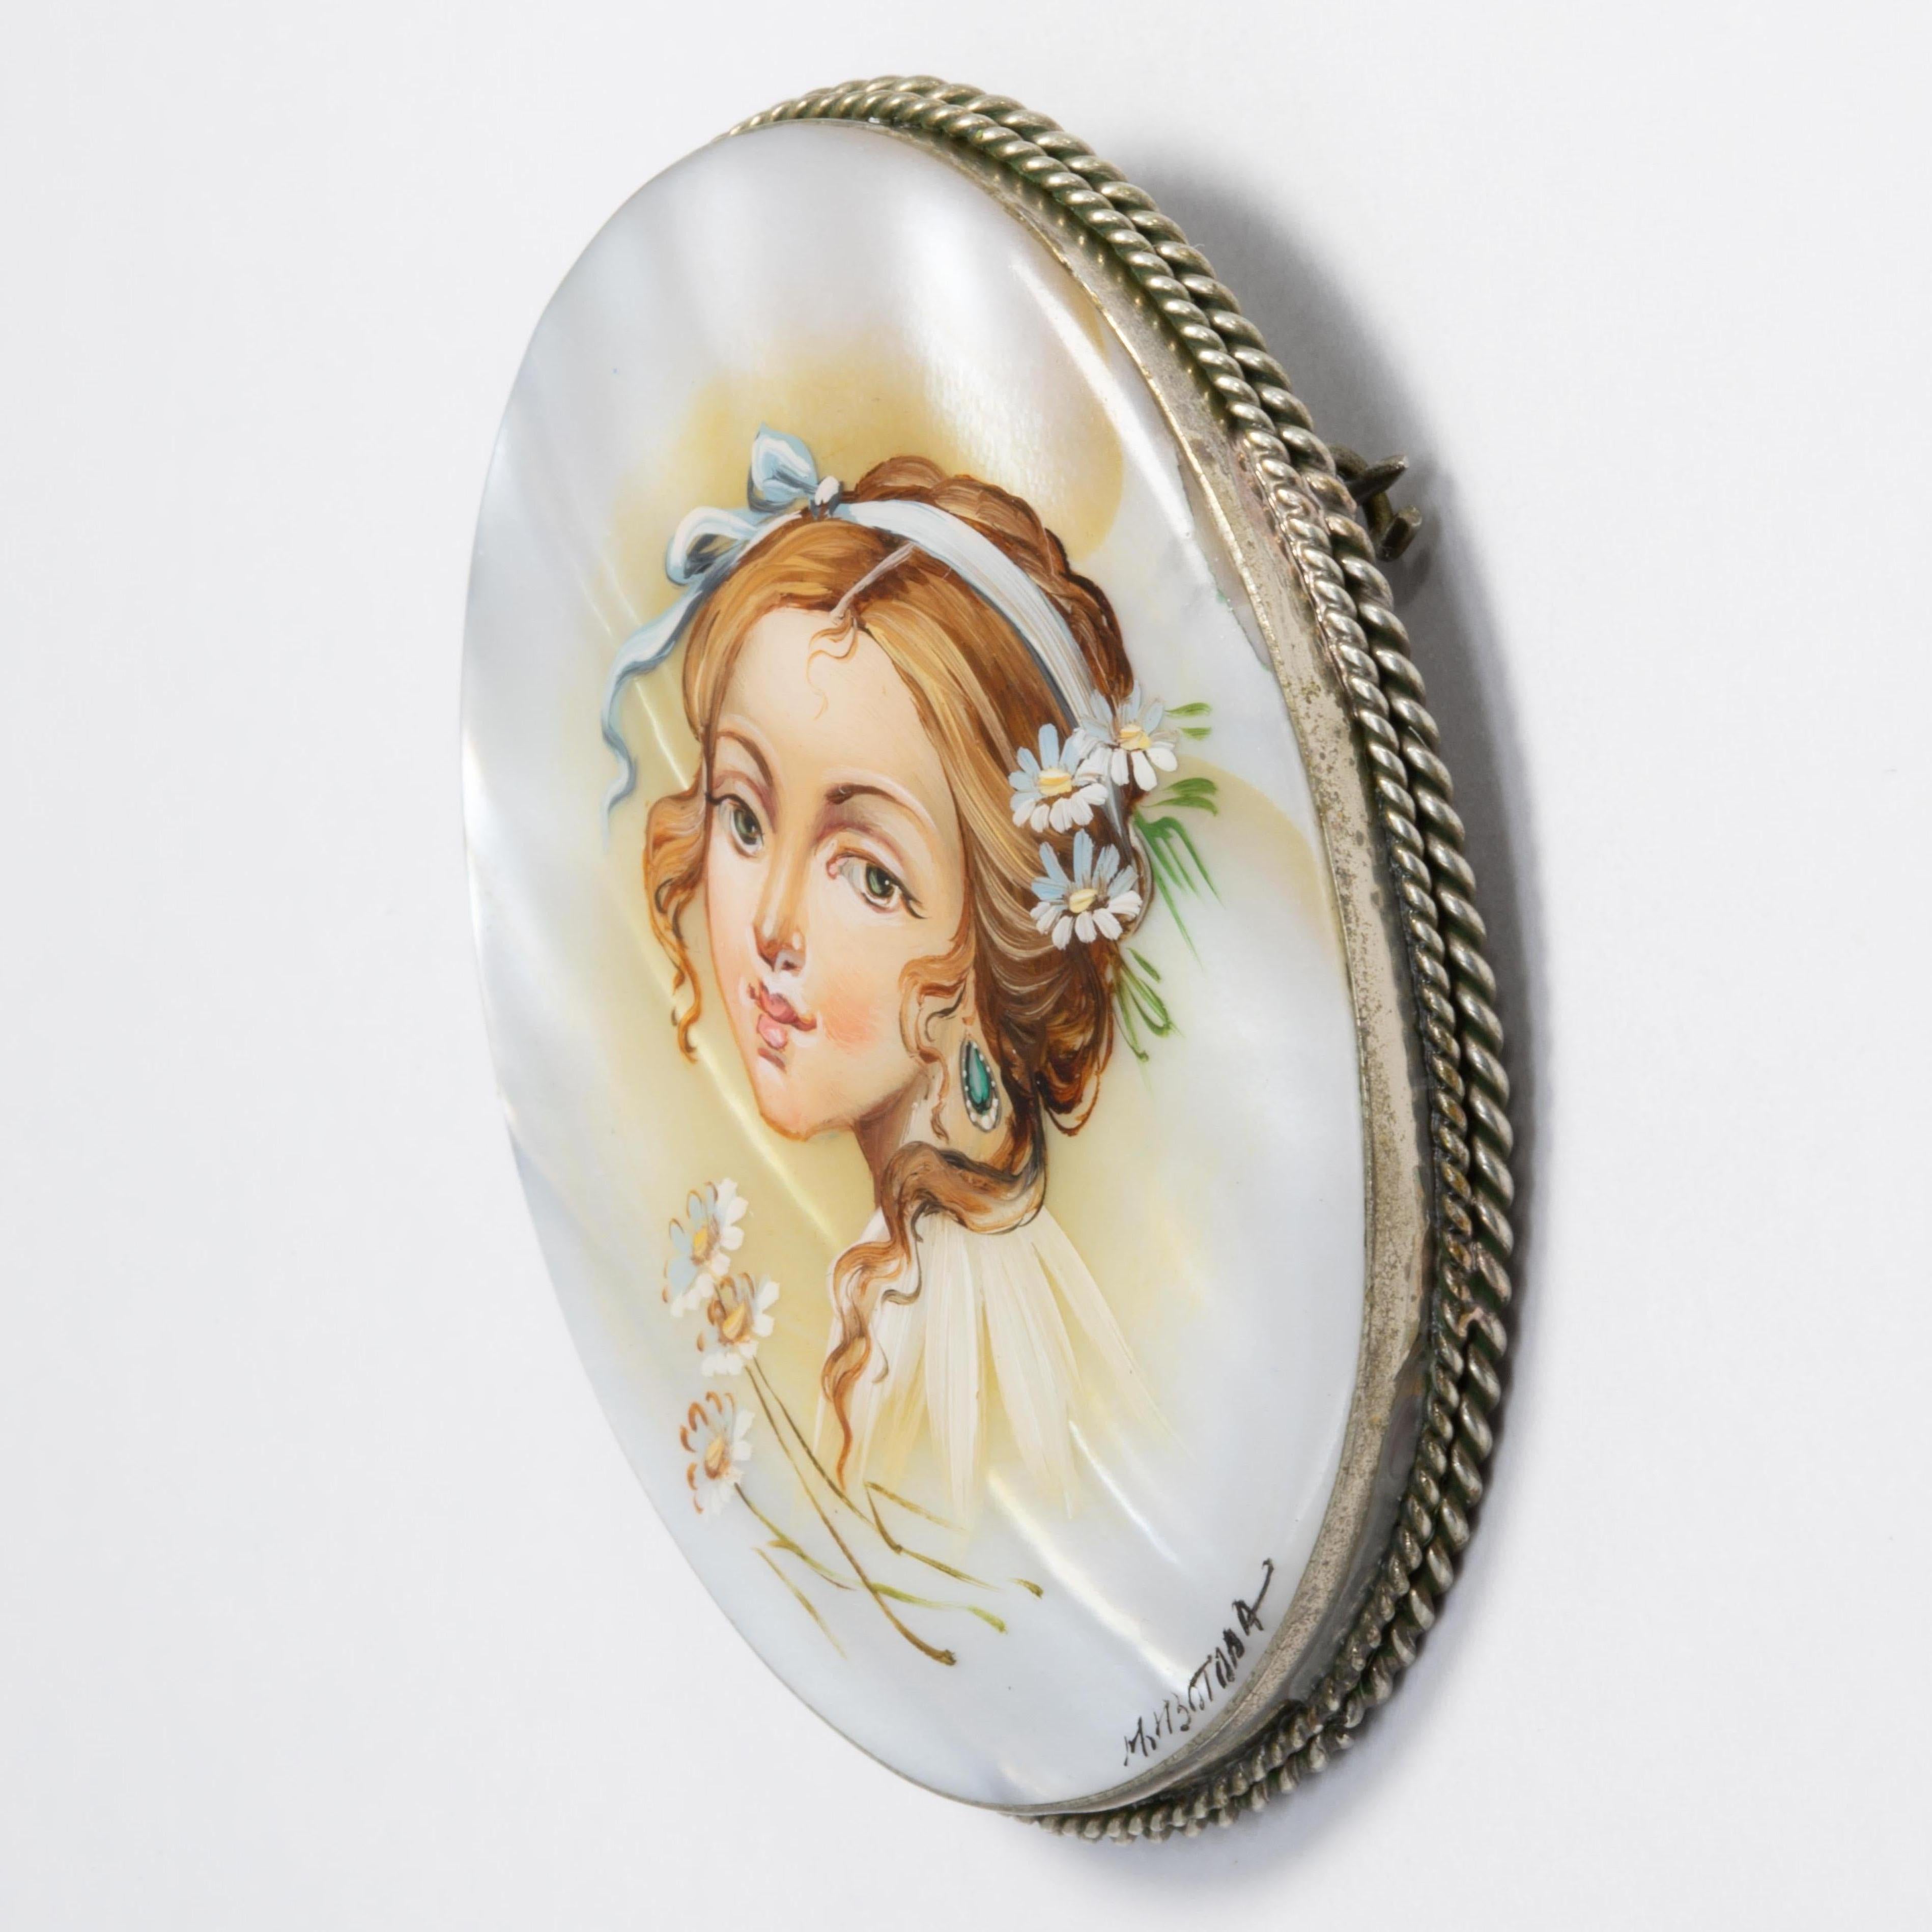 An exquisite Russian Fedoskino brooch set in a beautiful German silver bezel. Features a likeness of a beautiful woman, hand-painted on a mother-of-pearl stone with a layer of lacquer.

Signed by artist - M Izotova (М Изотова)

Circa early 1900s